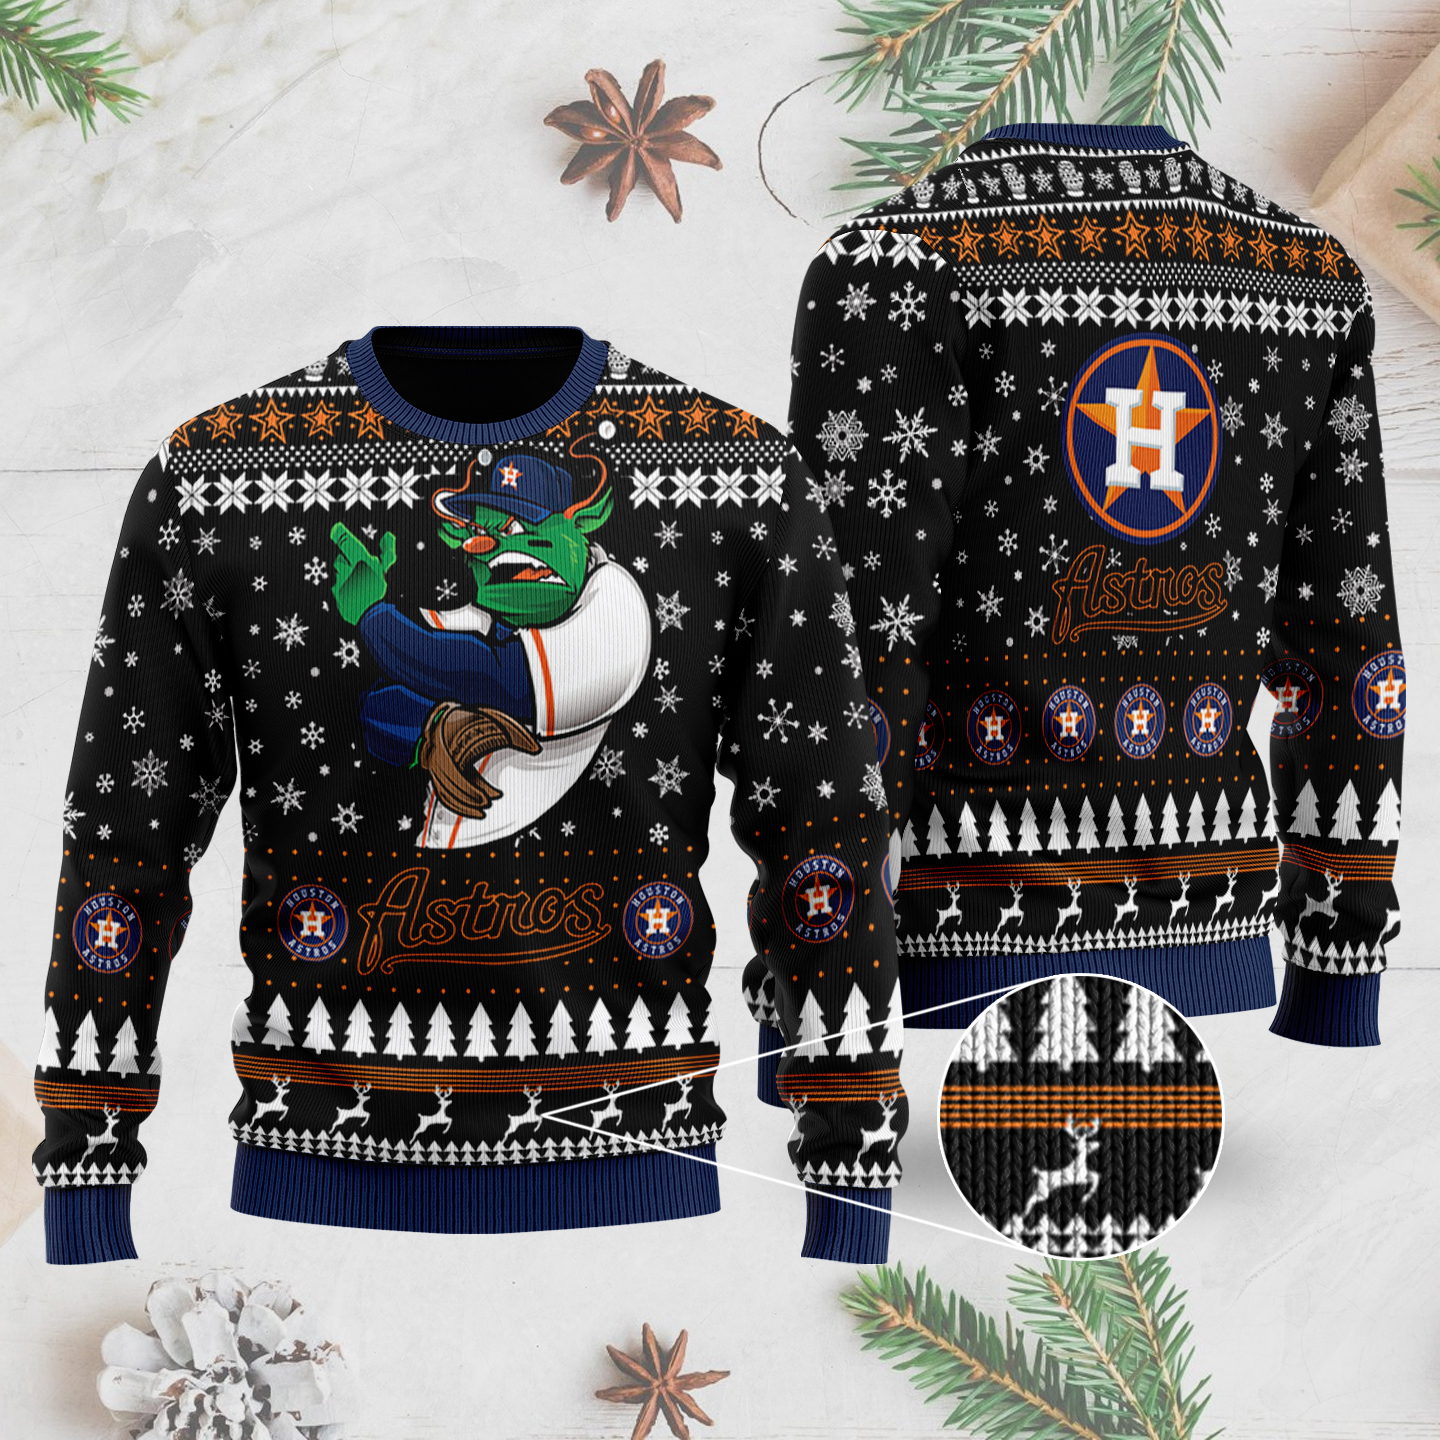 Houston Astros Shirts, Sweaters, Astros Ugly Sweaters, Dress